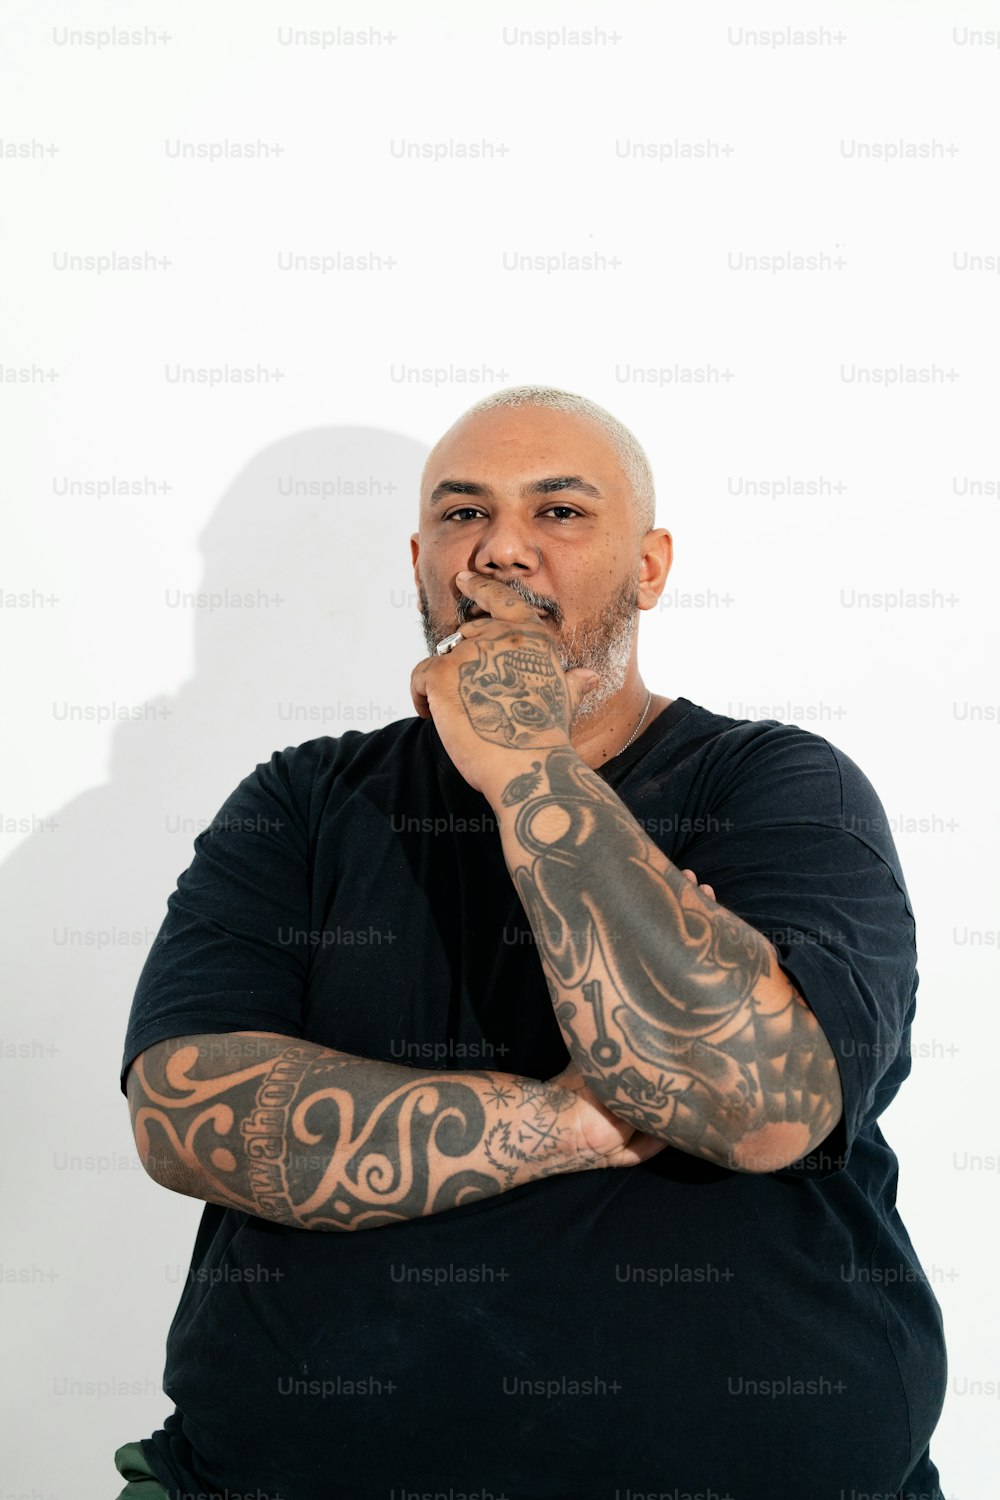 a man with tattoos on his arms posing for a picture